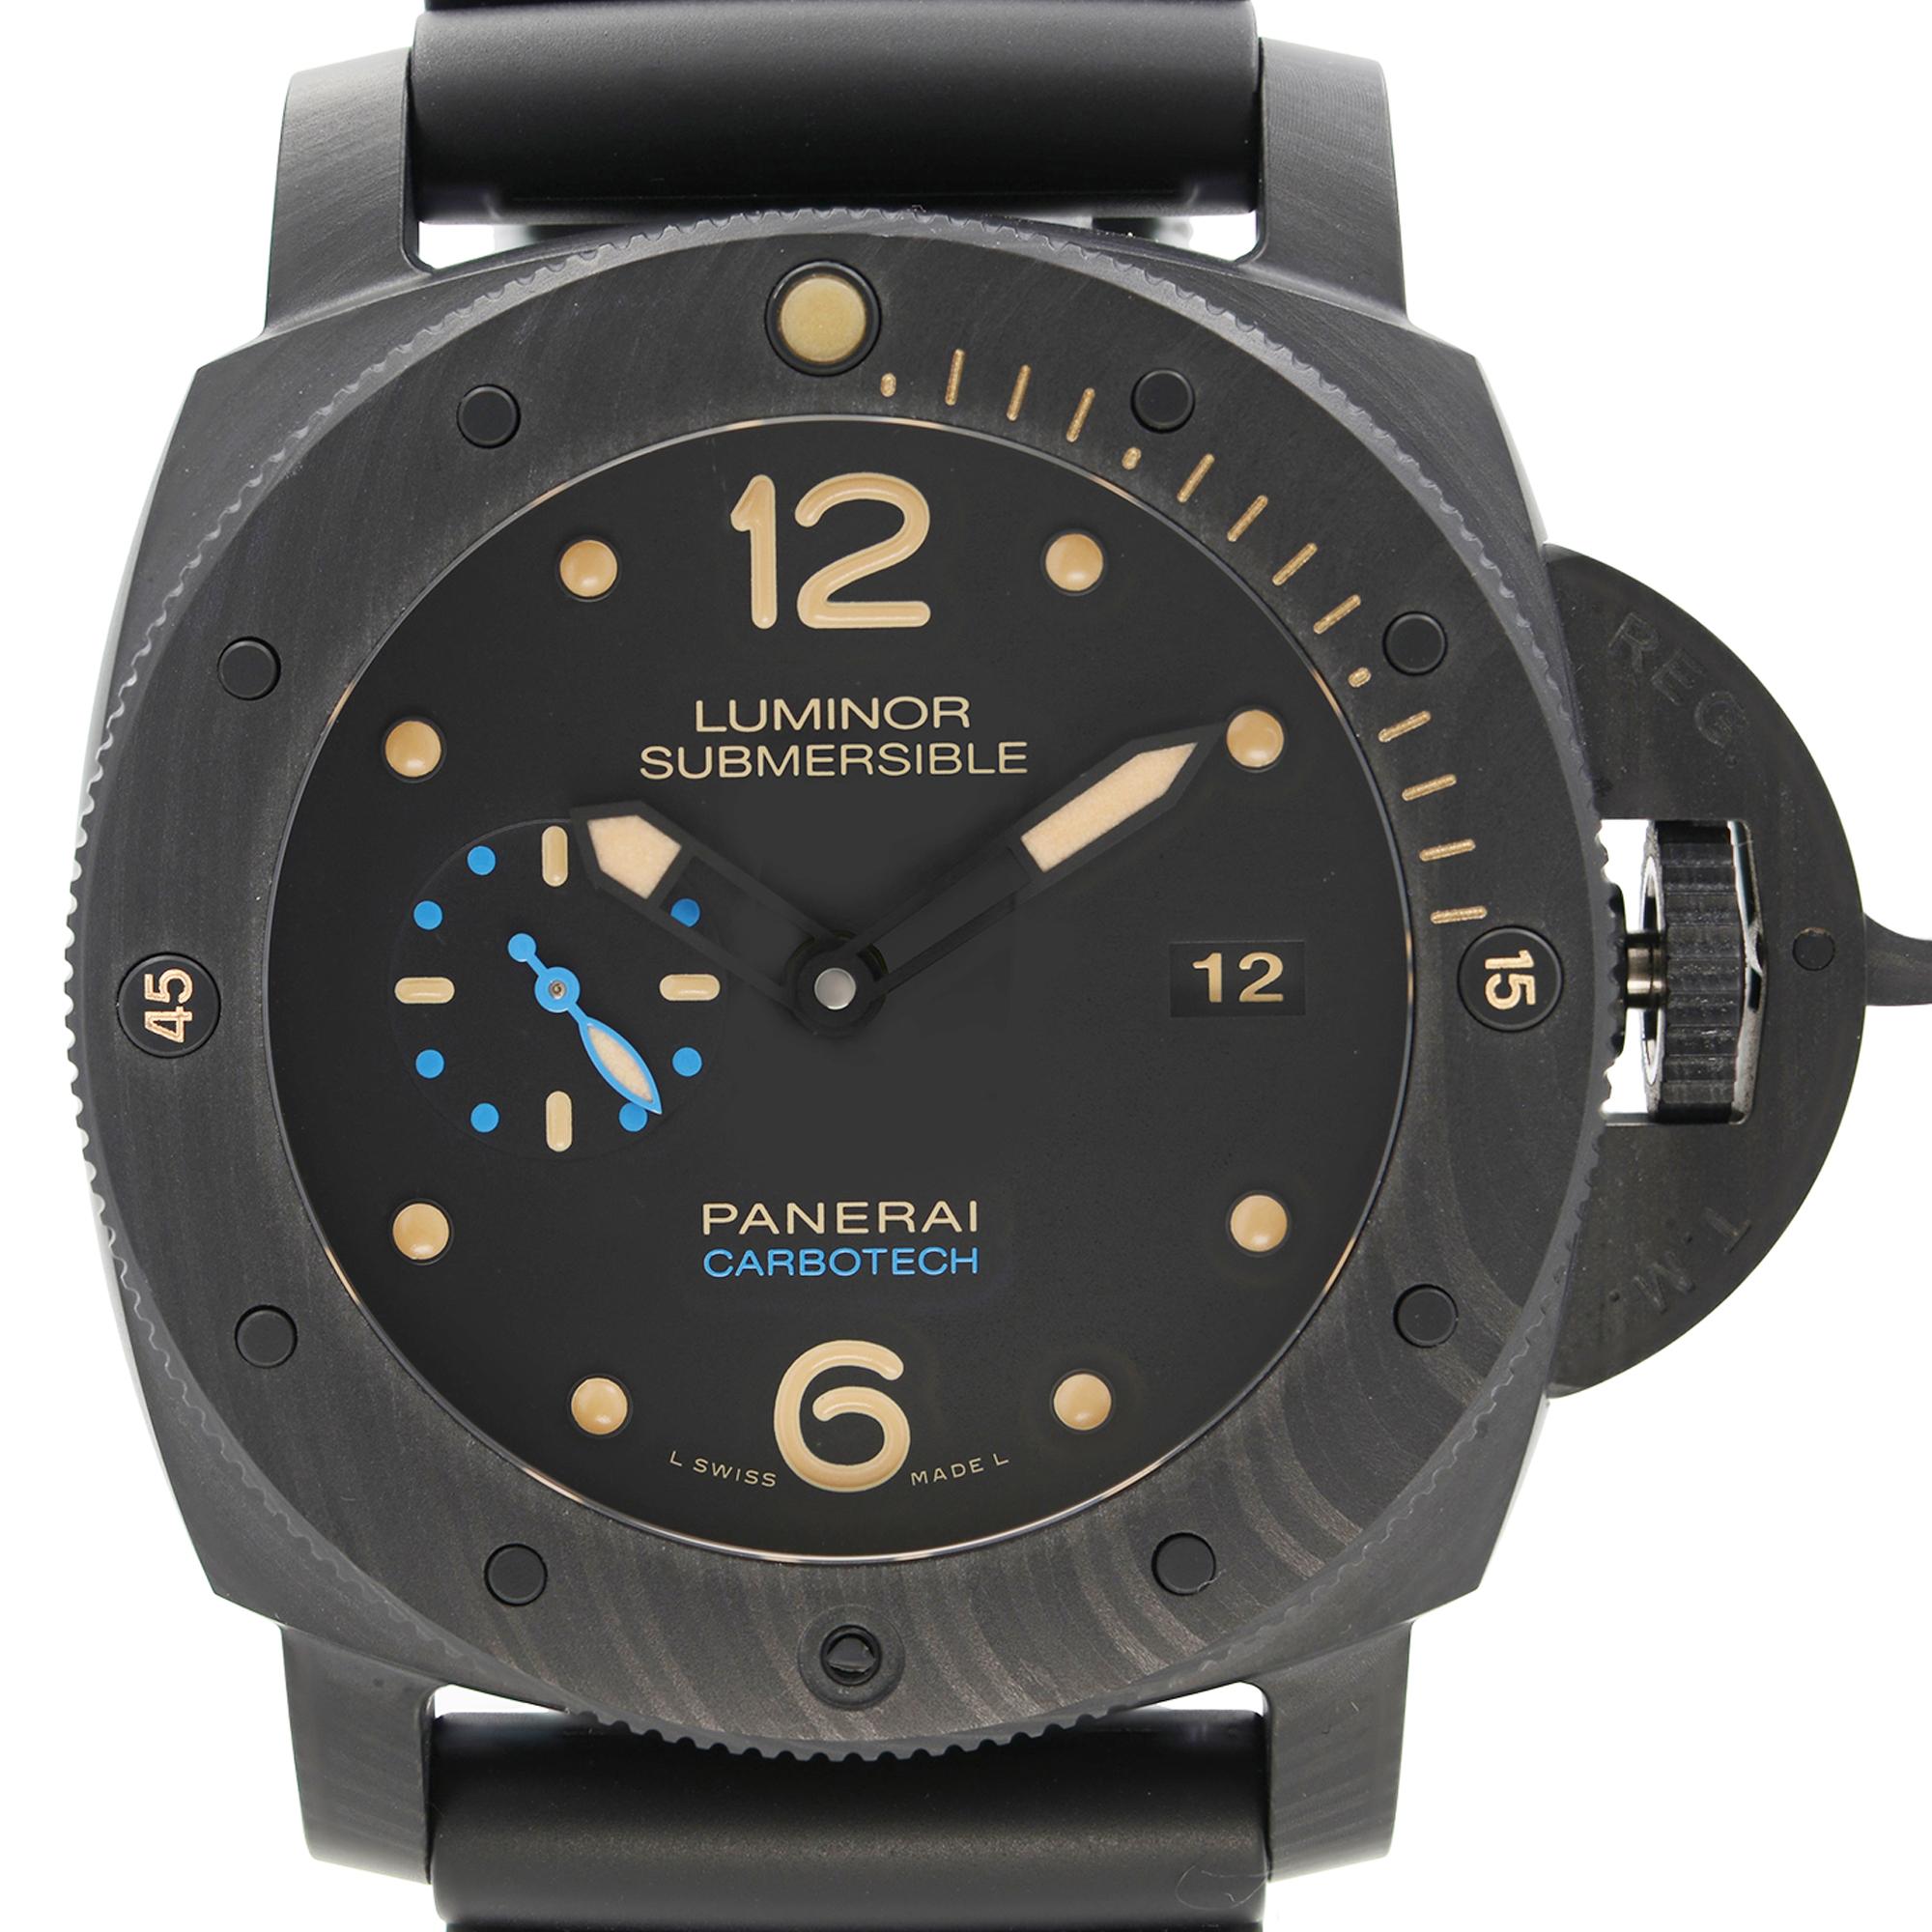 New With Defects Panerai Luminor Submersible 1950 3 Days Carbotech Black Dial Automatic Men's Watch PAM00616. Bezel rider No-30 is missing as in the pictures. This Beautiful Timepiece is Powered by Mechanical (Automatic) Movement And Features: Round